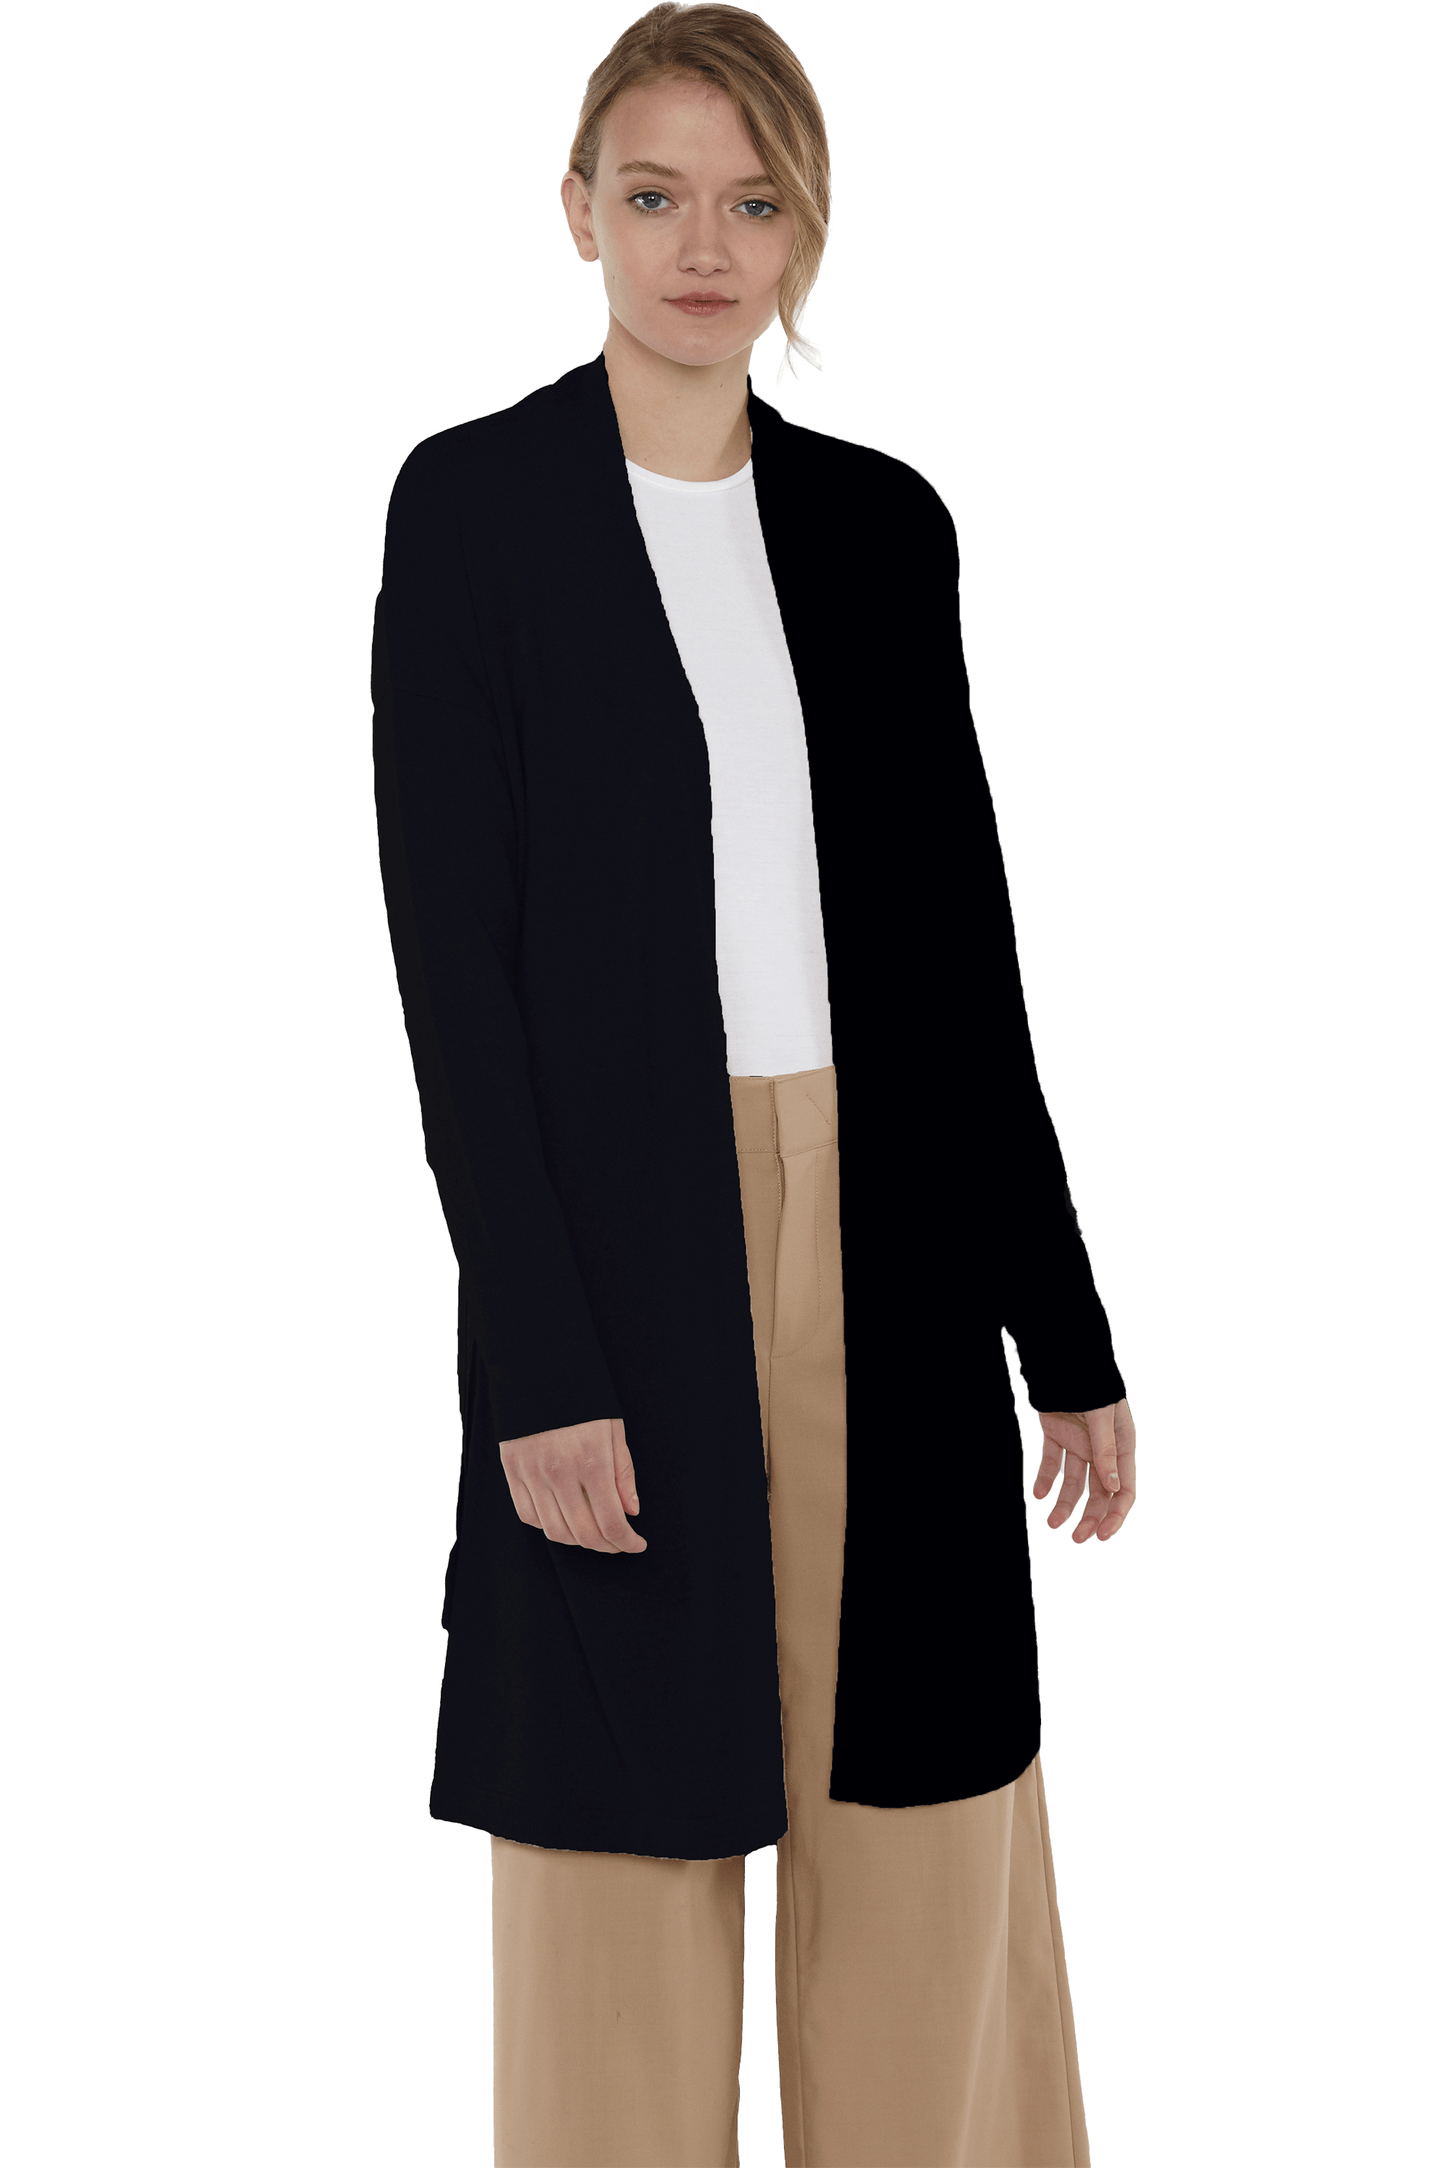 JENNIE LIU WOMEN'S 100% PURE CASHMERE LONG SLEEVE BELTED LUX WRAP CARDIGAN ROBE